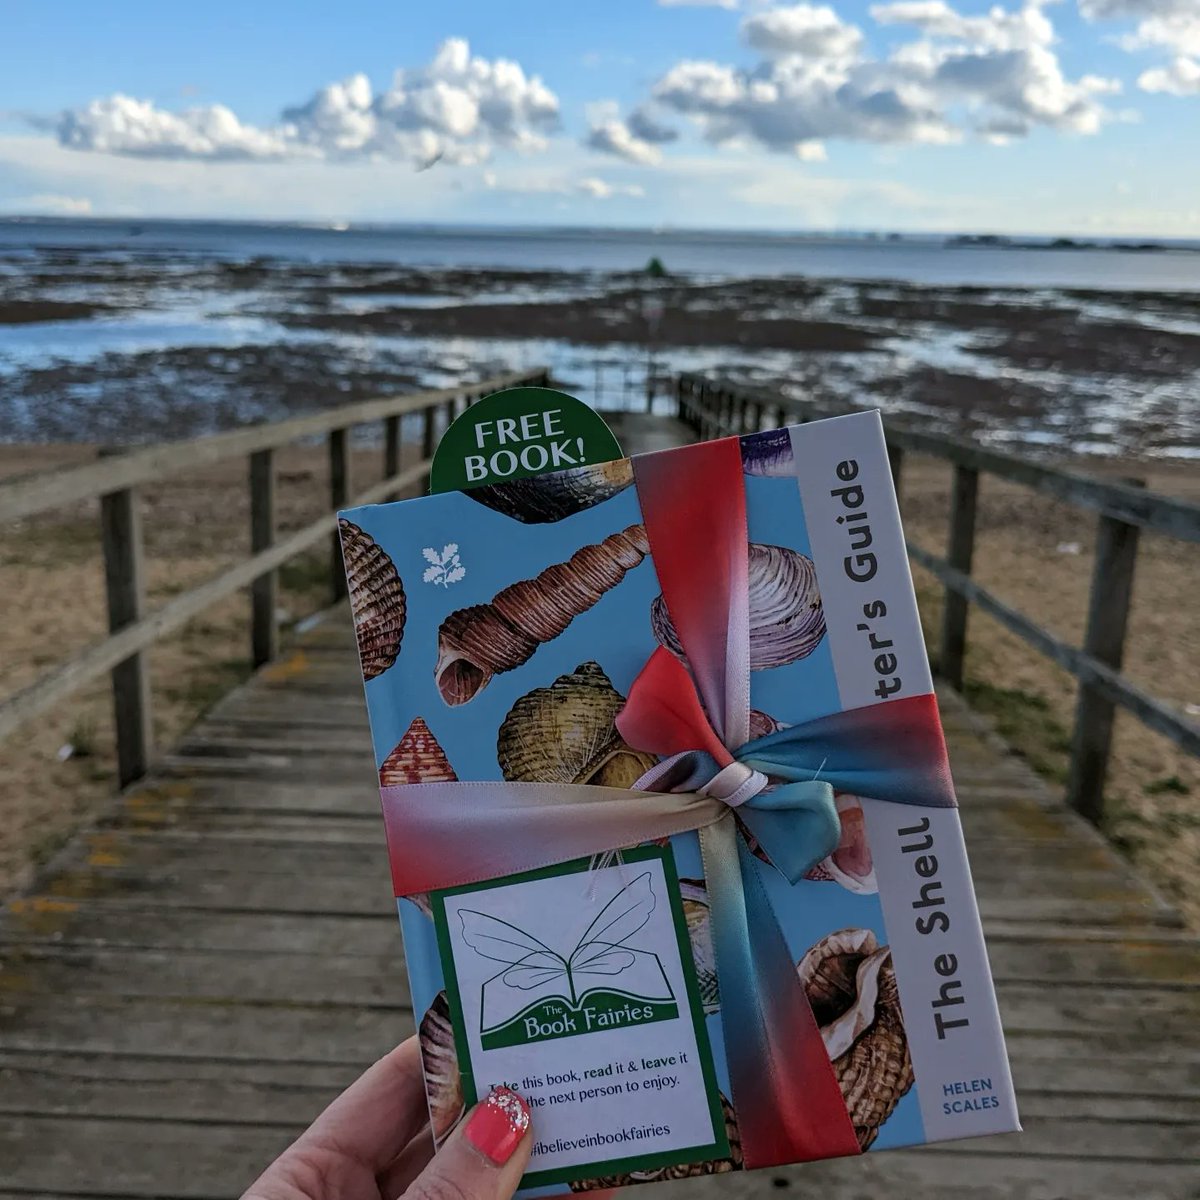 'Try leaving only footprints and taking only photos' 📸

The Book Fairies are sharing copies of The Shell Spotter's Guide, a National Trust book that encourages us to go out exploring along our riverbanks coastlines 🐚

#ibelieveinbookfairies #TBFShell #TBFCollins #NationalTrust